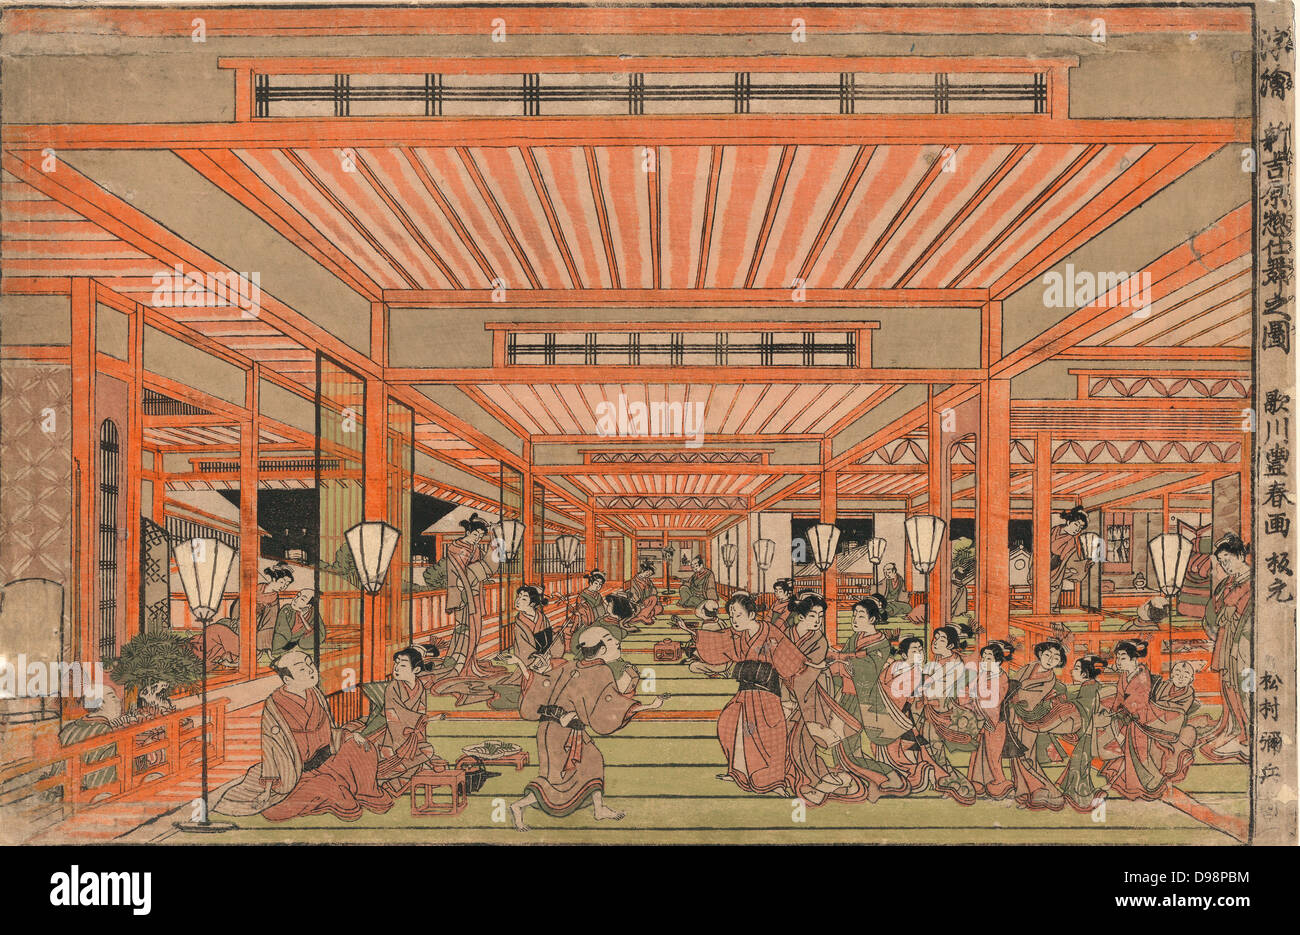 Cleaning out in Shin-Yorshiwara: Edo (Tokyo) red light district, c1775. Women collecting together in open hall. Some women are still with clients. Utagawa Toyoharu (1735-1814) Japanese Ukiyo-e artist. Enterainment Prostitution Stock Photo